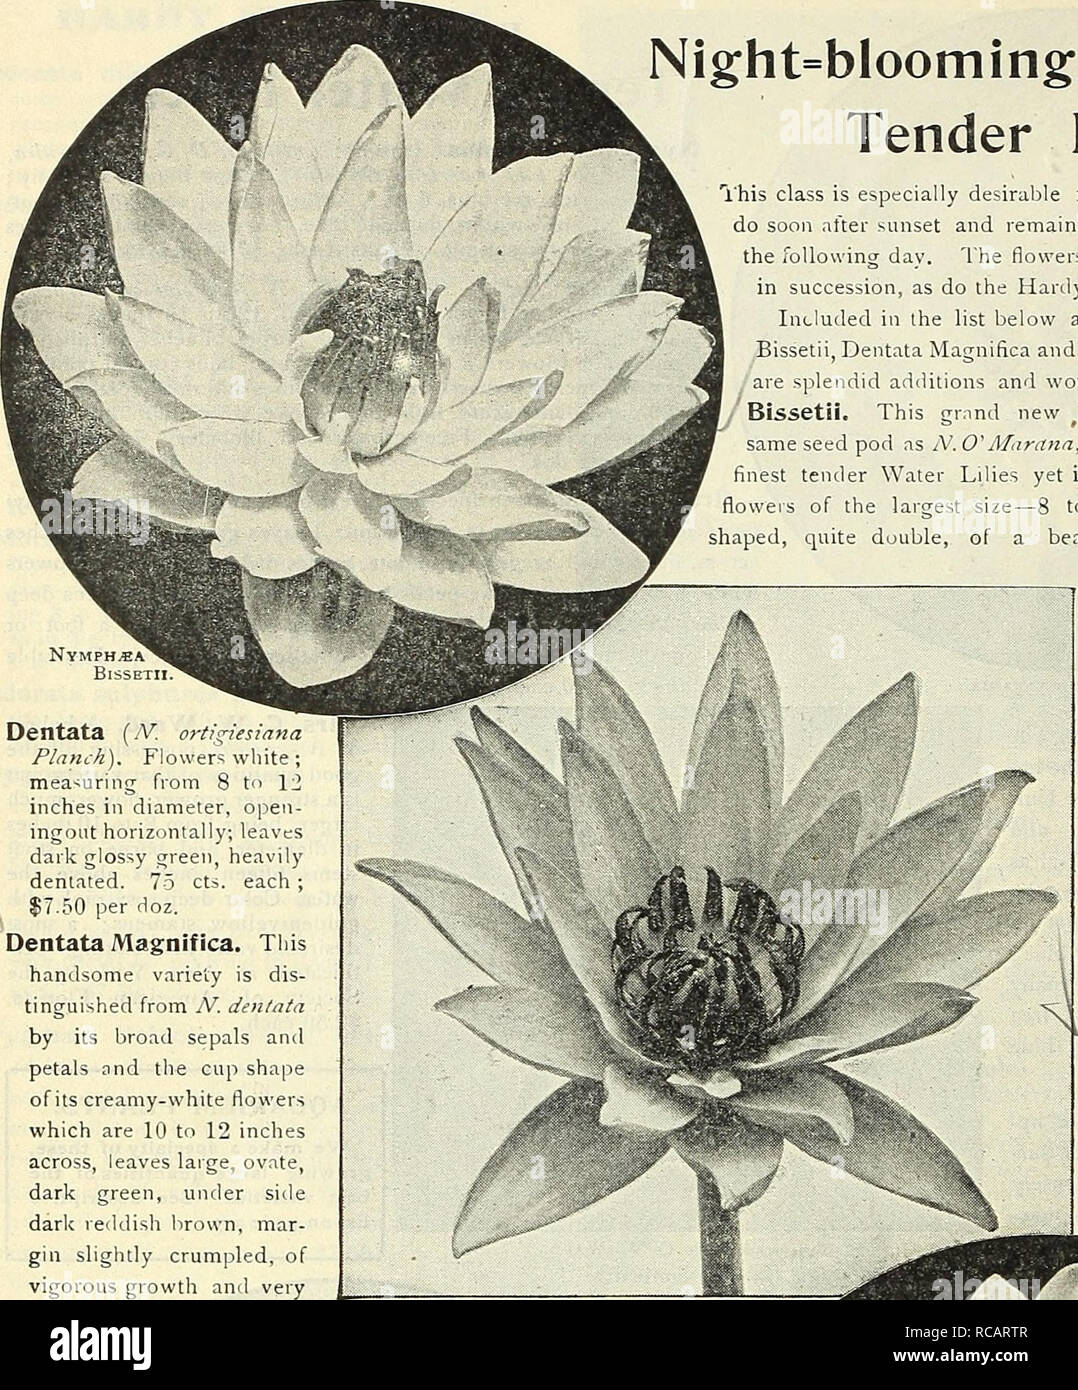 . Dreer's 1838 1908 garden book. Seeds Catalogs; Nursery stock Catalogs; Gardening Equipment and supplies Catalogs; Flowers Seeds Catalogs; Vegetables Seeds Catalogs; Fruit Seeds Catalogs. 232 (nHHroTADRKR-PHIlADELPtllAM^^WAnRLlll[^&quot;Â°AQUATICS- 1. Dentata [IV. ortigiesiana Planch). Flower^ white; measuring from 8 tn 1 inches in diameter, opeii- ingoiit horizontally, leaves dark glossy green, heavily dehtated. 75 cts. each ; .50 per doz. Dentata Magnifica. Tins handsome variety is dis- tinguished from N. dentata by its broad sepals and petals and the cup shape of its creamy-white flowers  Stock Photo